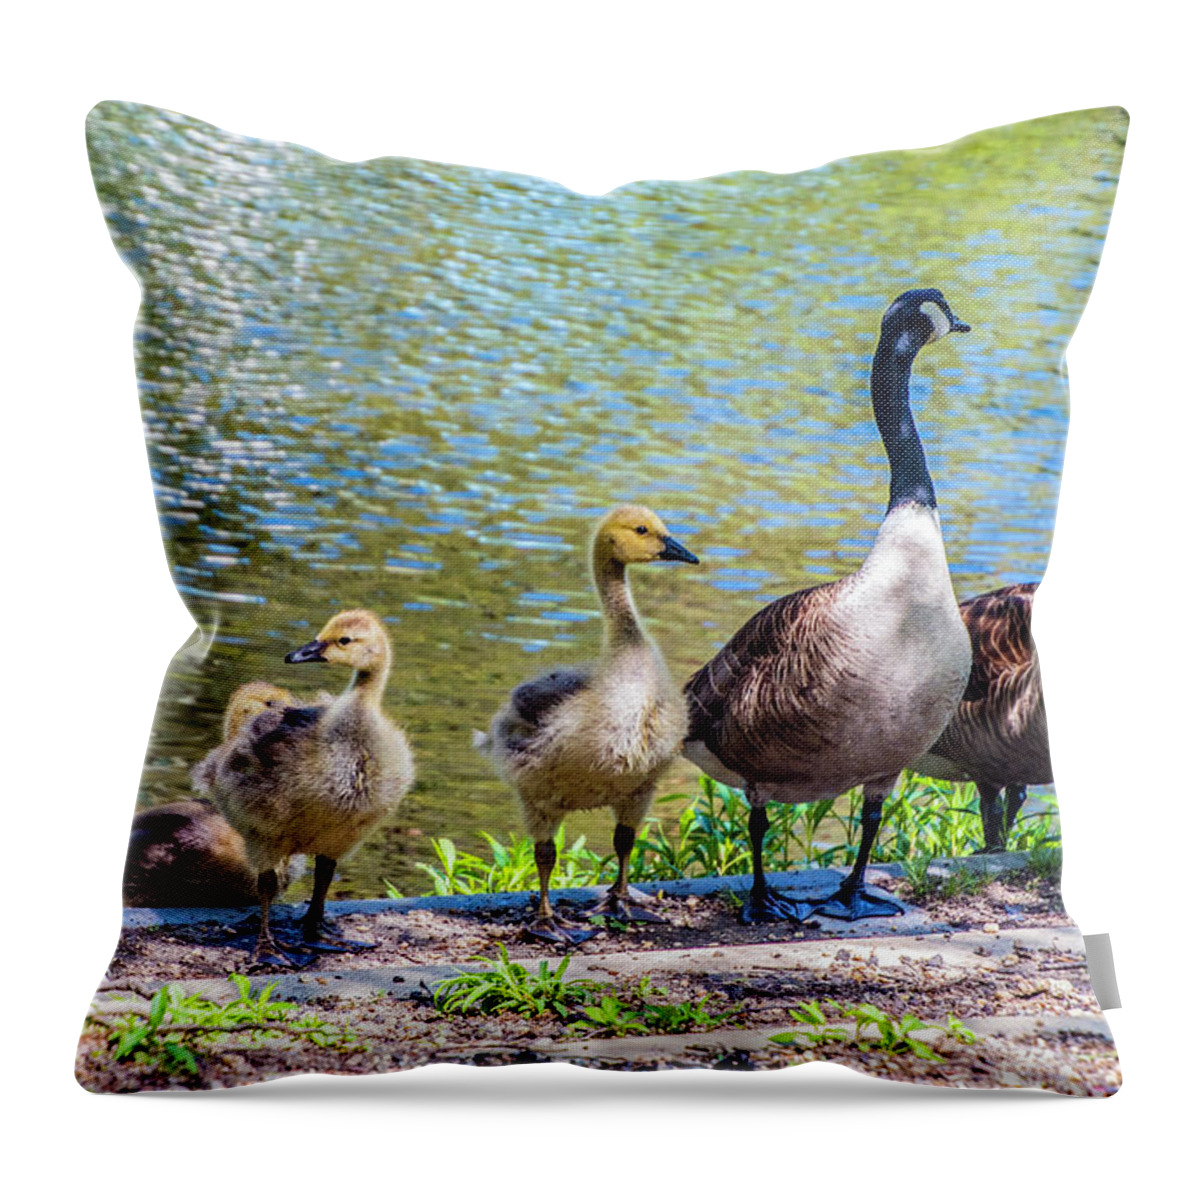 Geese Throw Pillow featuring the photograph The Family by Cathy Kovarik